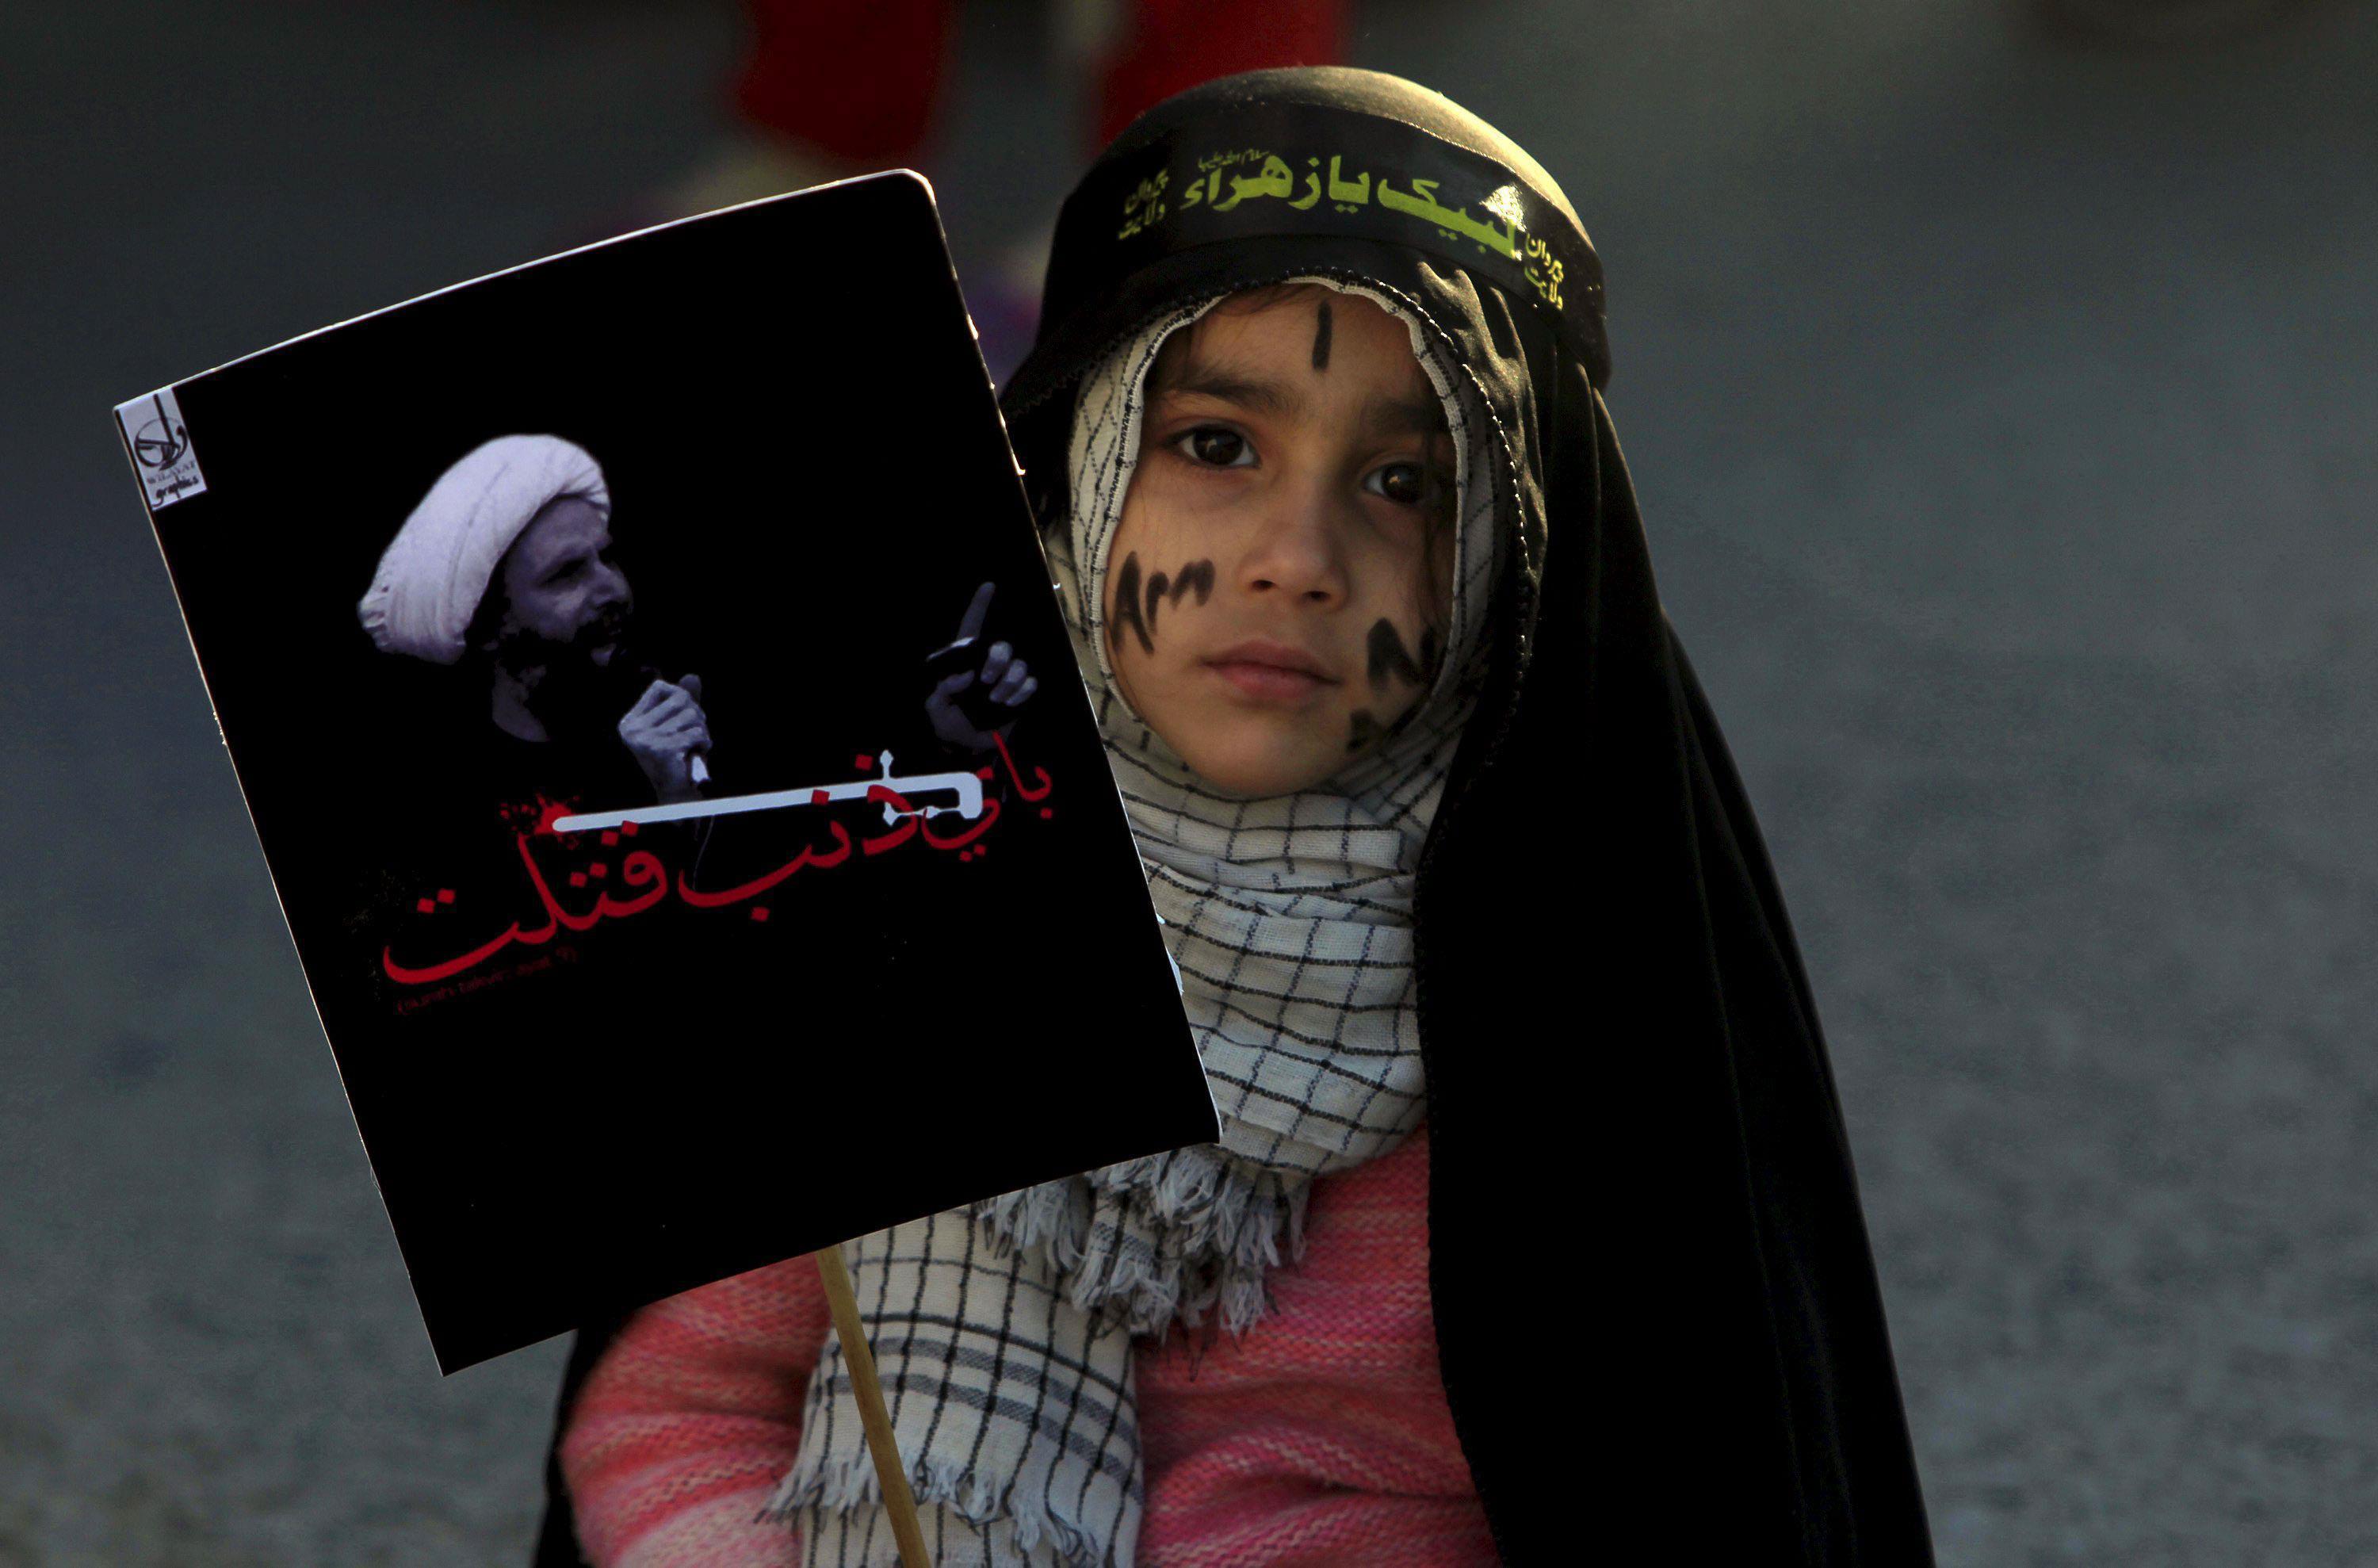 A Shi'ite Muslim girl holds a picture of Shi'ite Muslim cleric Nimr al-Nimr as she takes part in a p